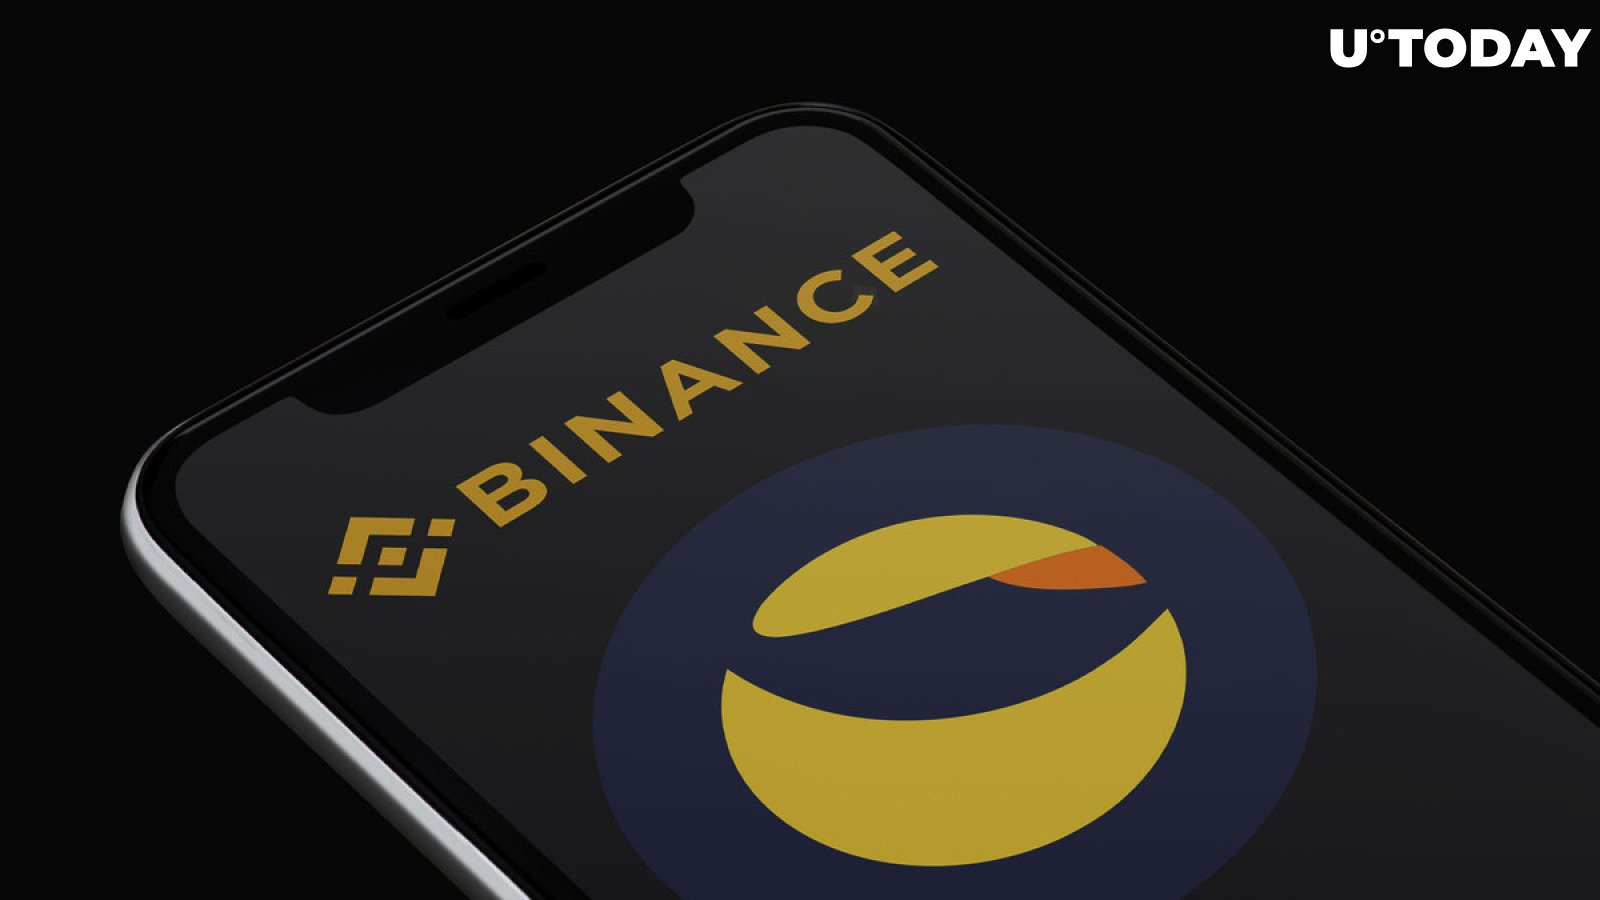 Binance Faces $2 Billion Outflows as Challenges Pile Up